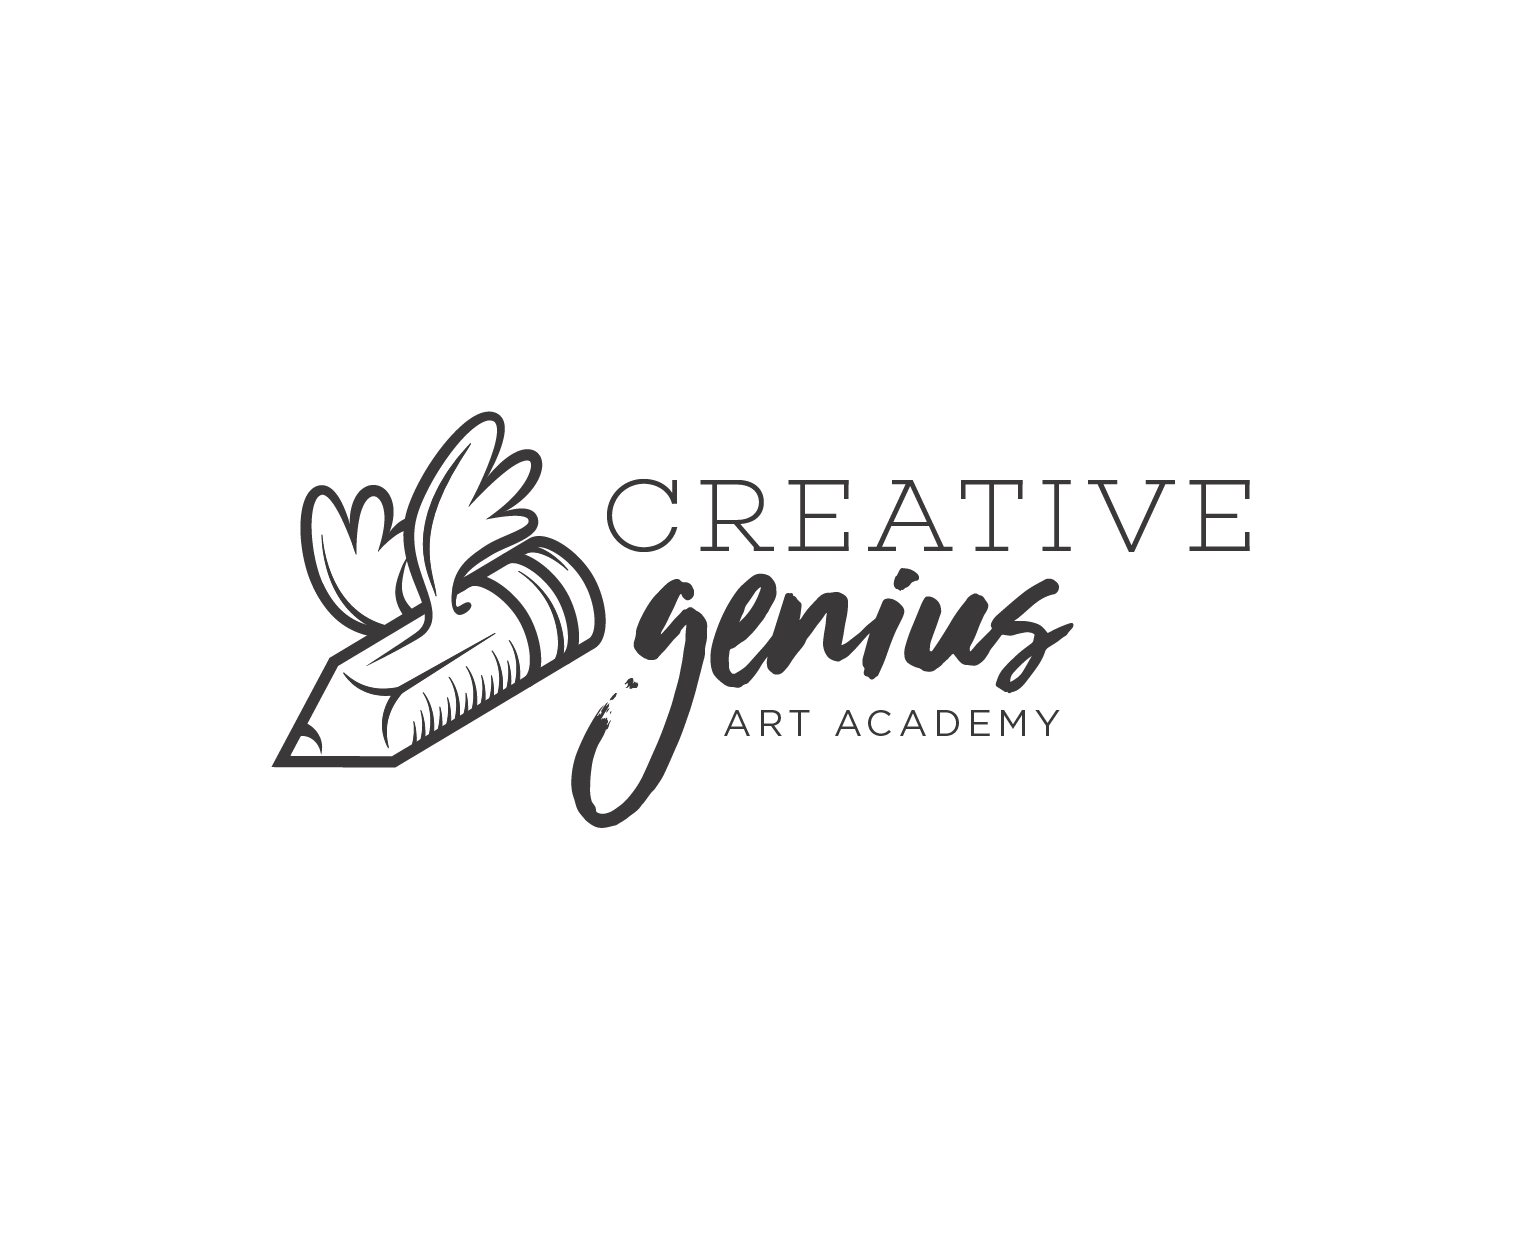 Creative business branding for long-term success. This logo was created for Creative Genius Art Academy